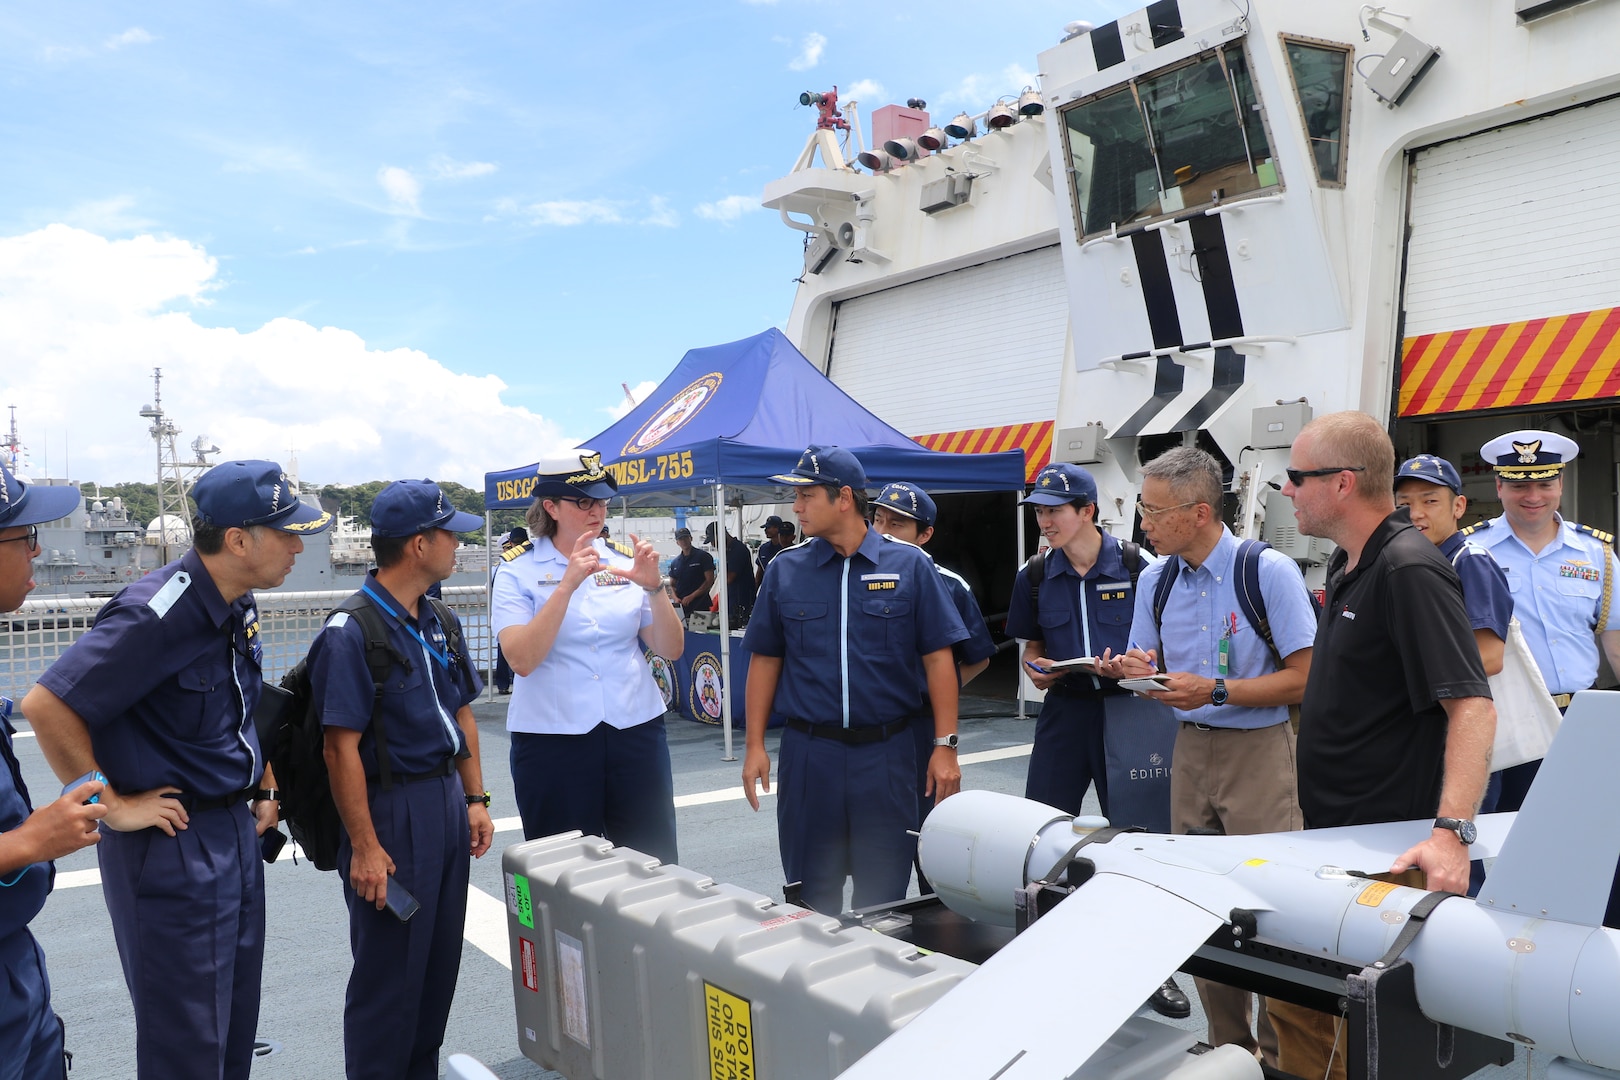 Capt. Rula Deisher, U.S. Coast Guard Cutter Munro’s (WMSL 755) commanding officer, discusses the cutter’s unmanned aerial system capabilities with members from the Japan Coast Guard aboard the Munro during the cutter’s port call to Yokosuka, Japan, Aug. 8, 2023. Yokosuka was Munro’s first international port call during their months-long deployment to the Indo-Pacific region. (U.S. Coast Guard photo)